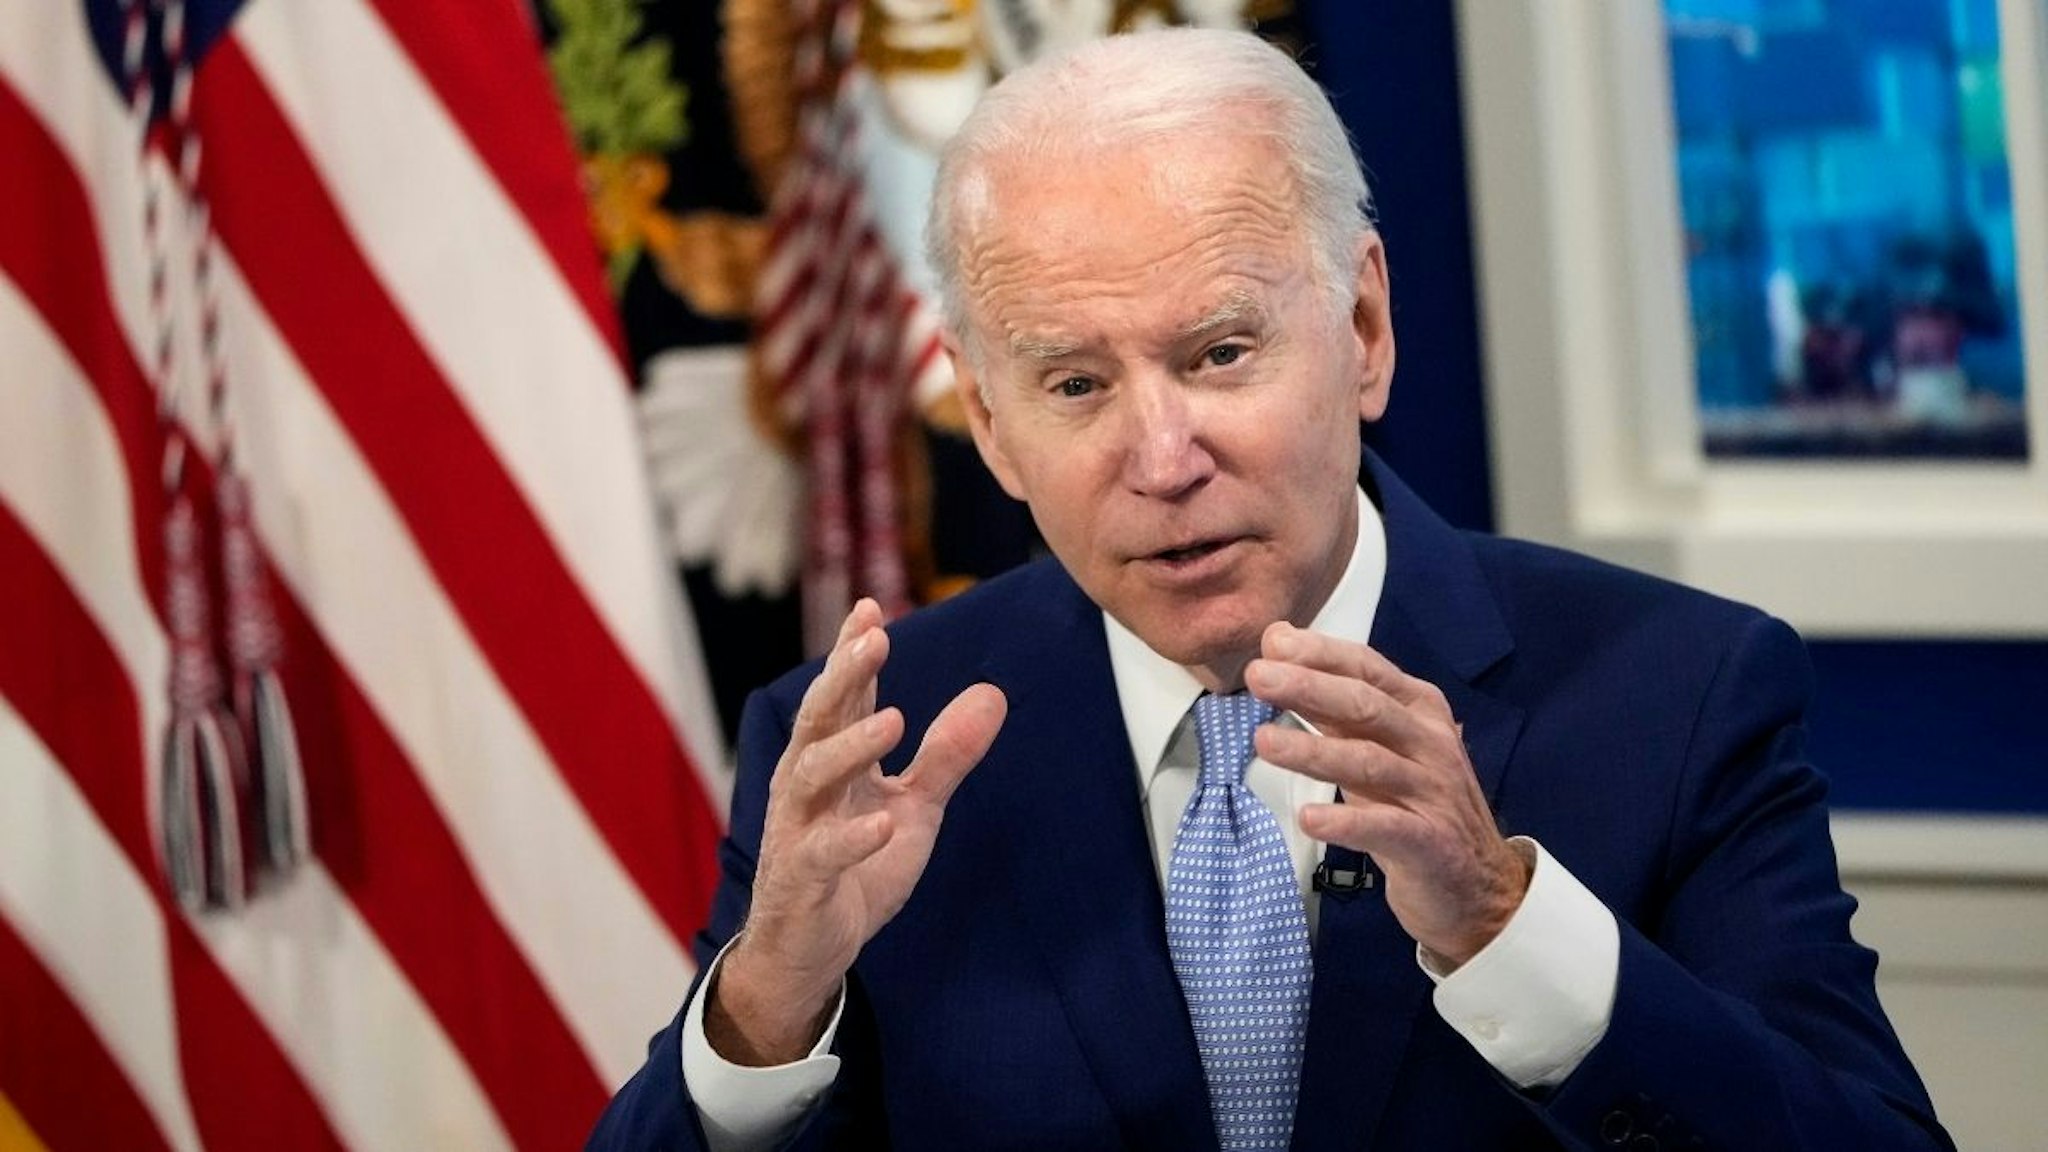 U.S. President Joe Biden speaks during a meeting with his administration's Supply Chain Disruptions Task Force and private sector CEOs in the South Court Auditorium of the White House December 22, 2021 in Washington, DC.